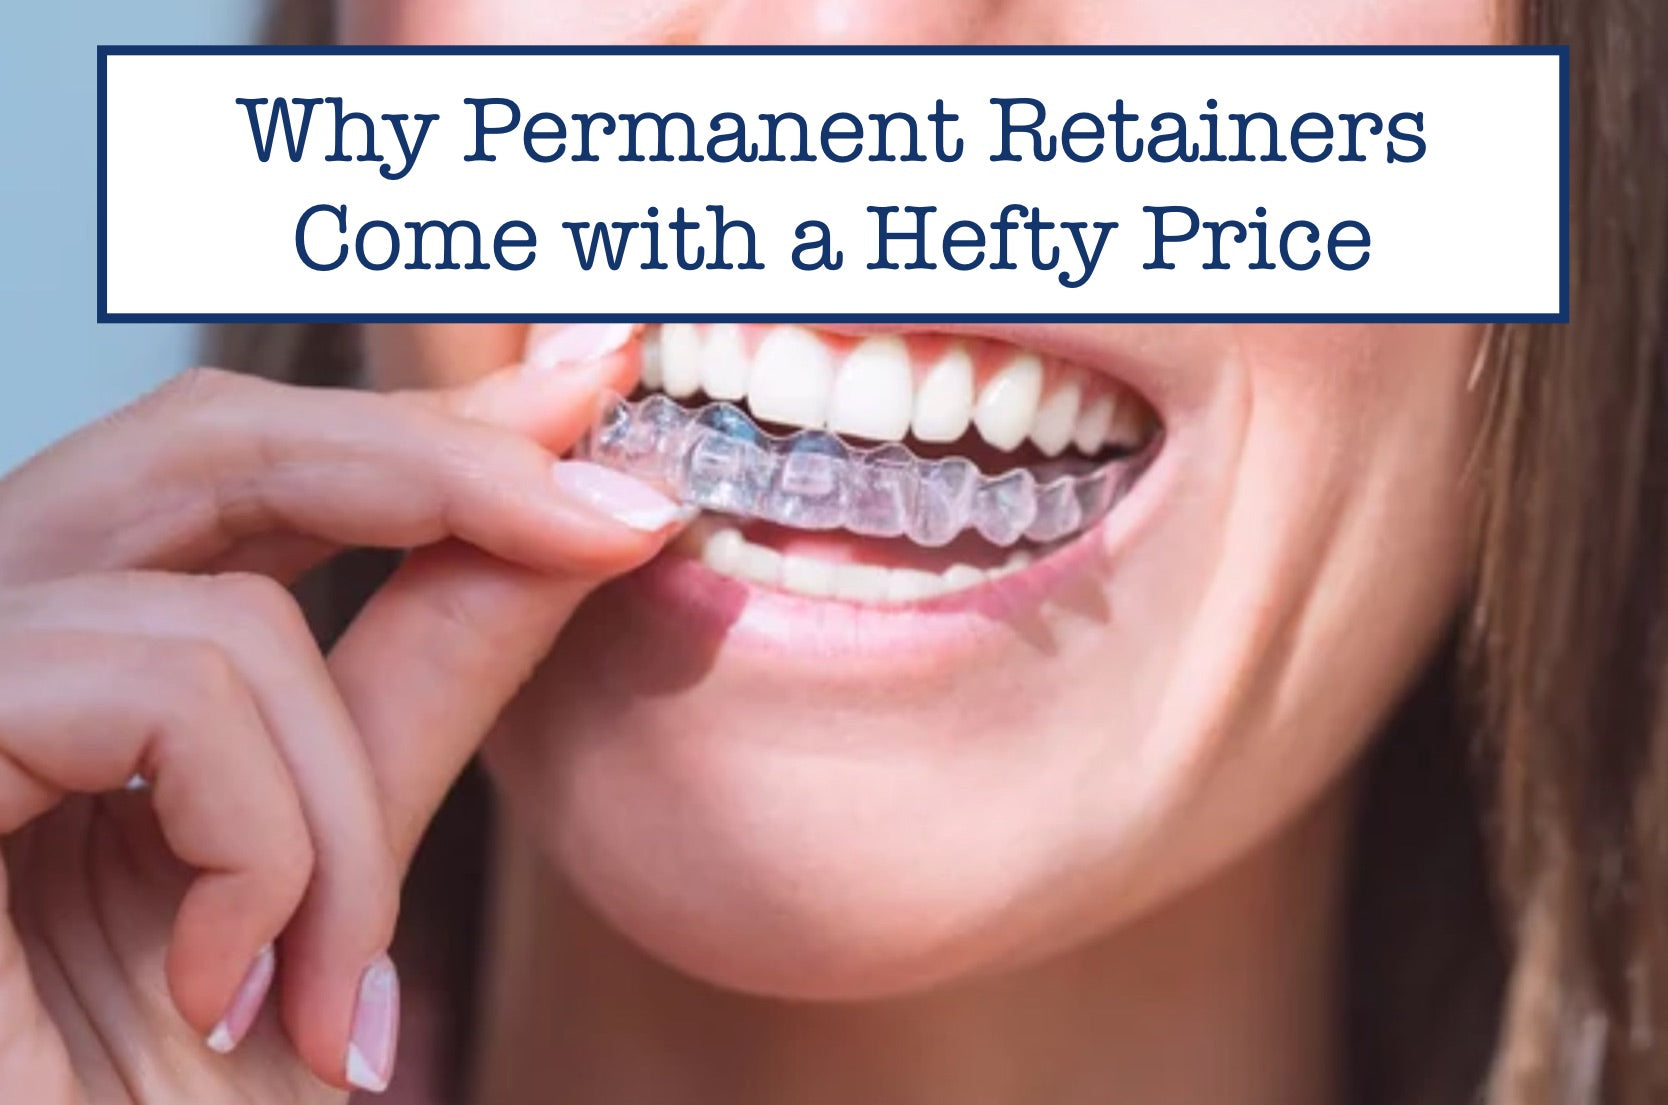 Why Permanent Retainers Come with a Hefty Price